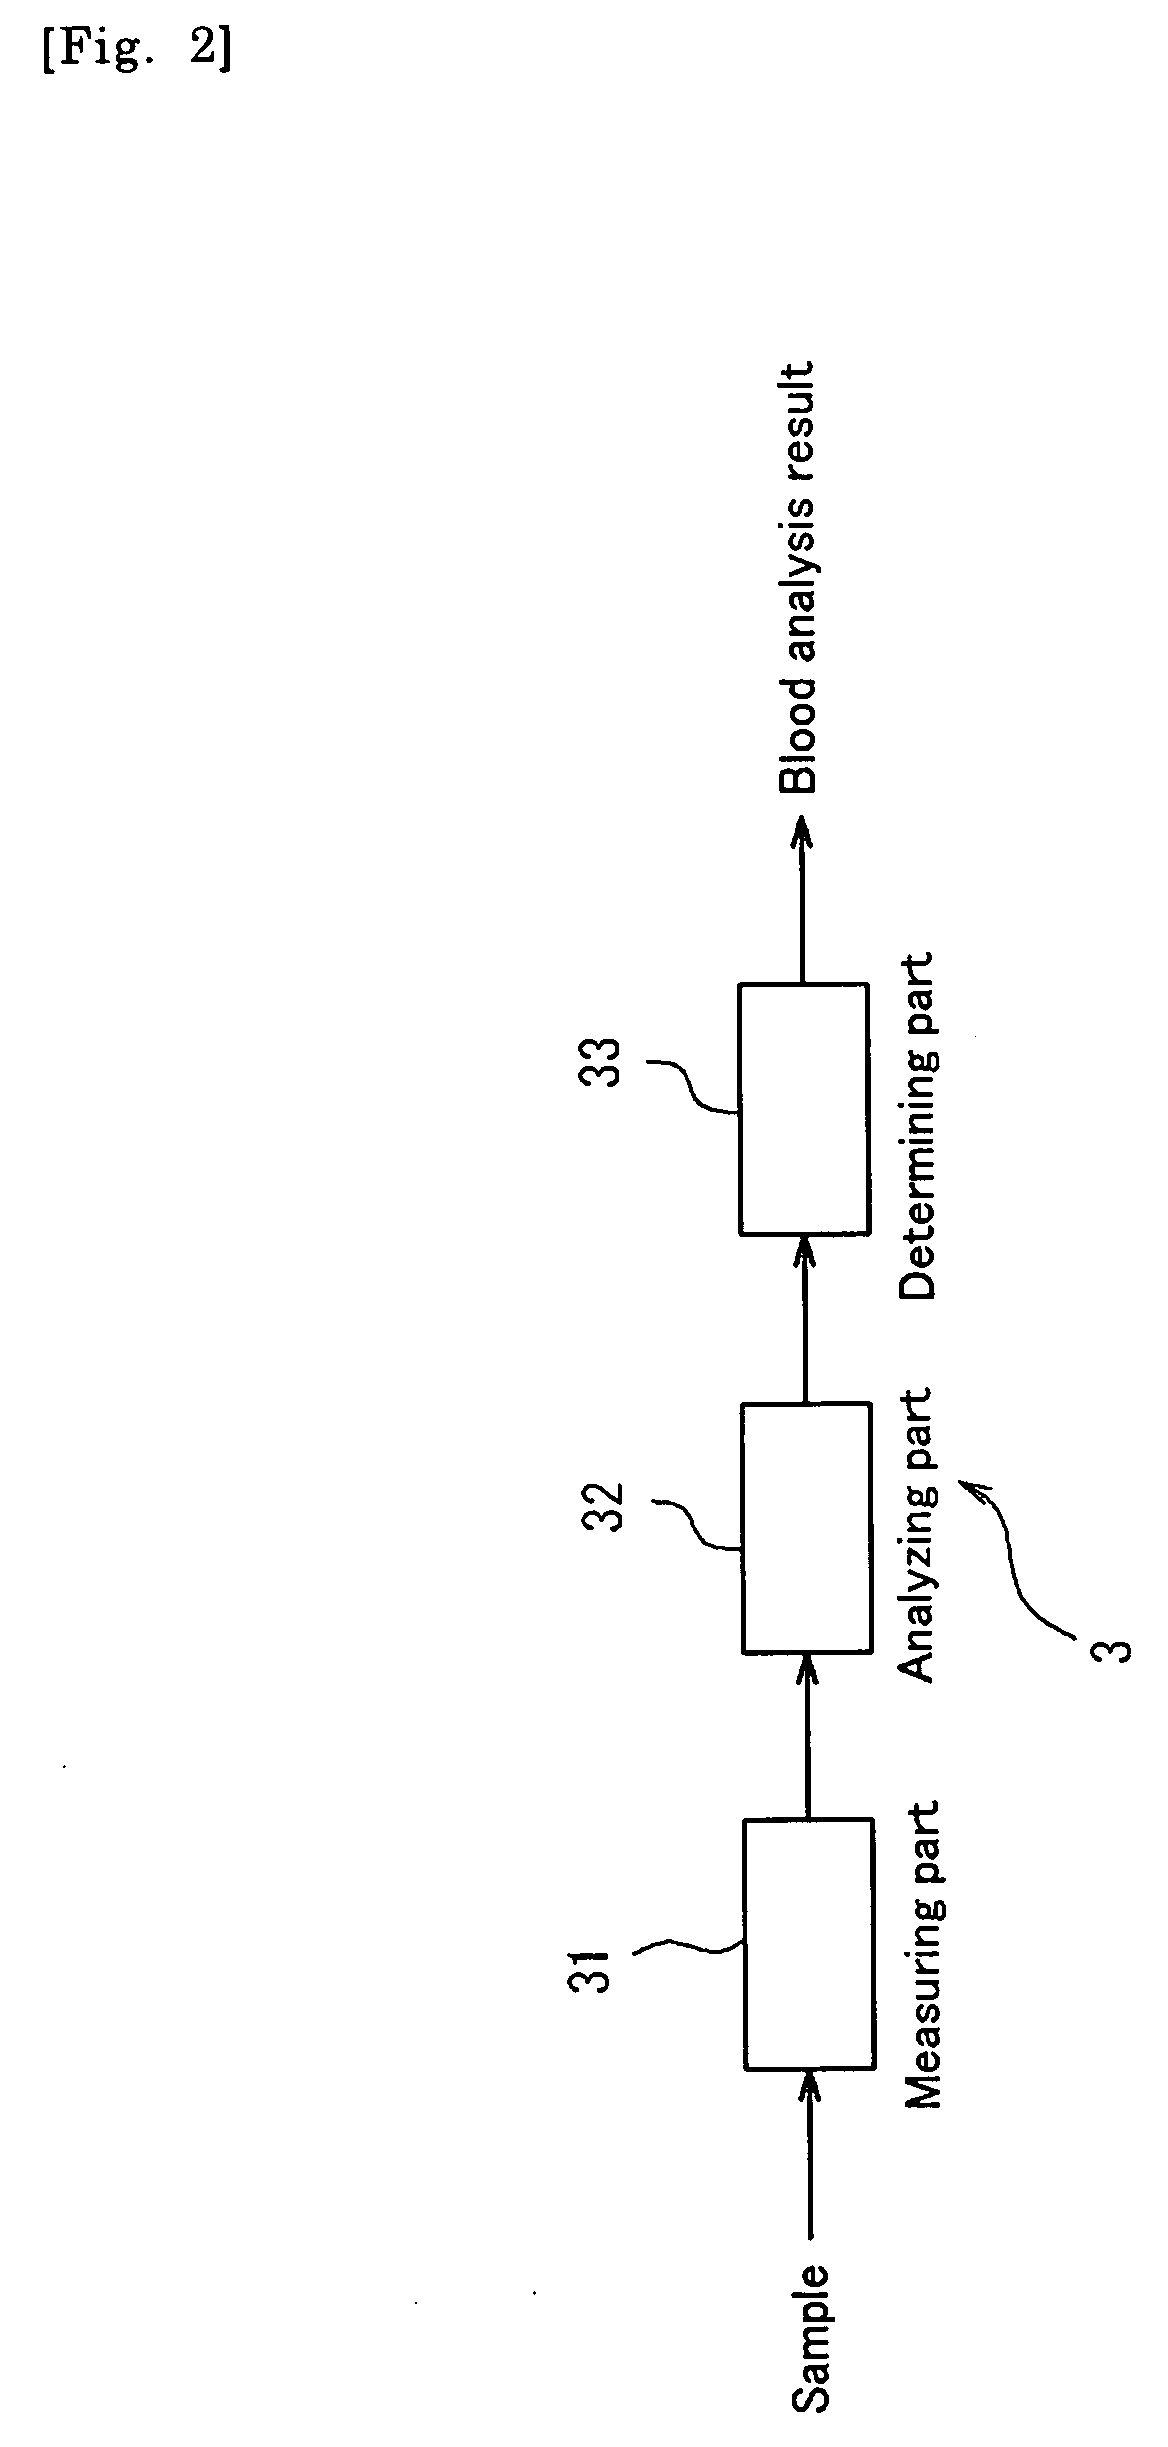 Apparatus for obtaining an image of a blood cell and method for obtaining an image of a blood cell